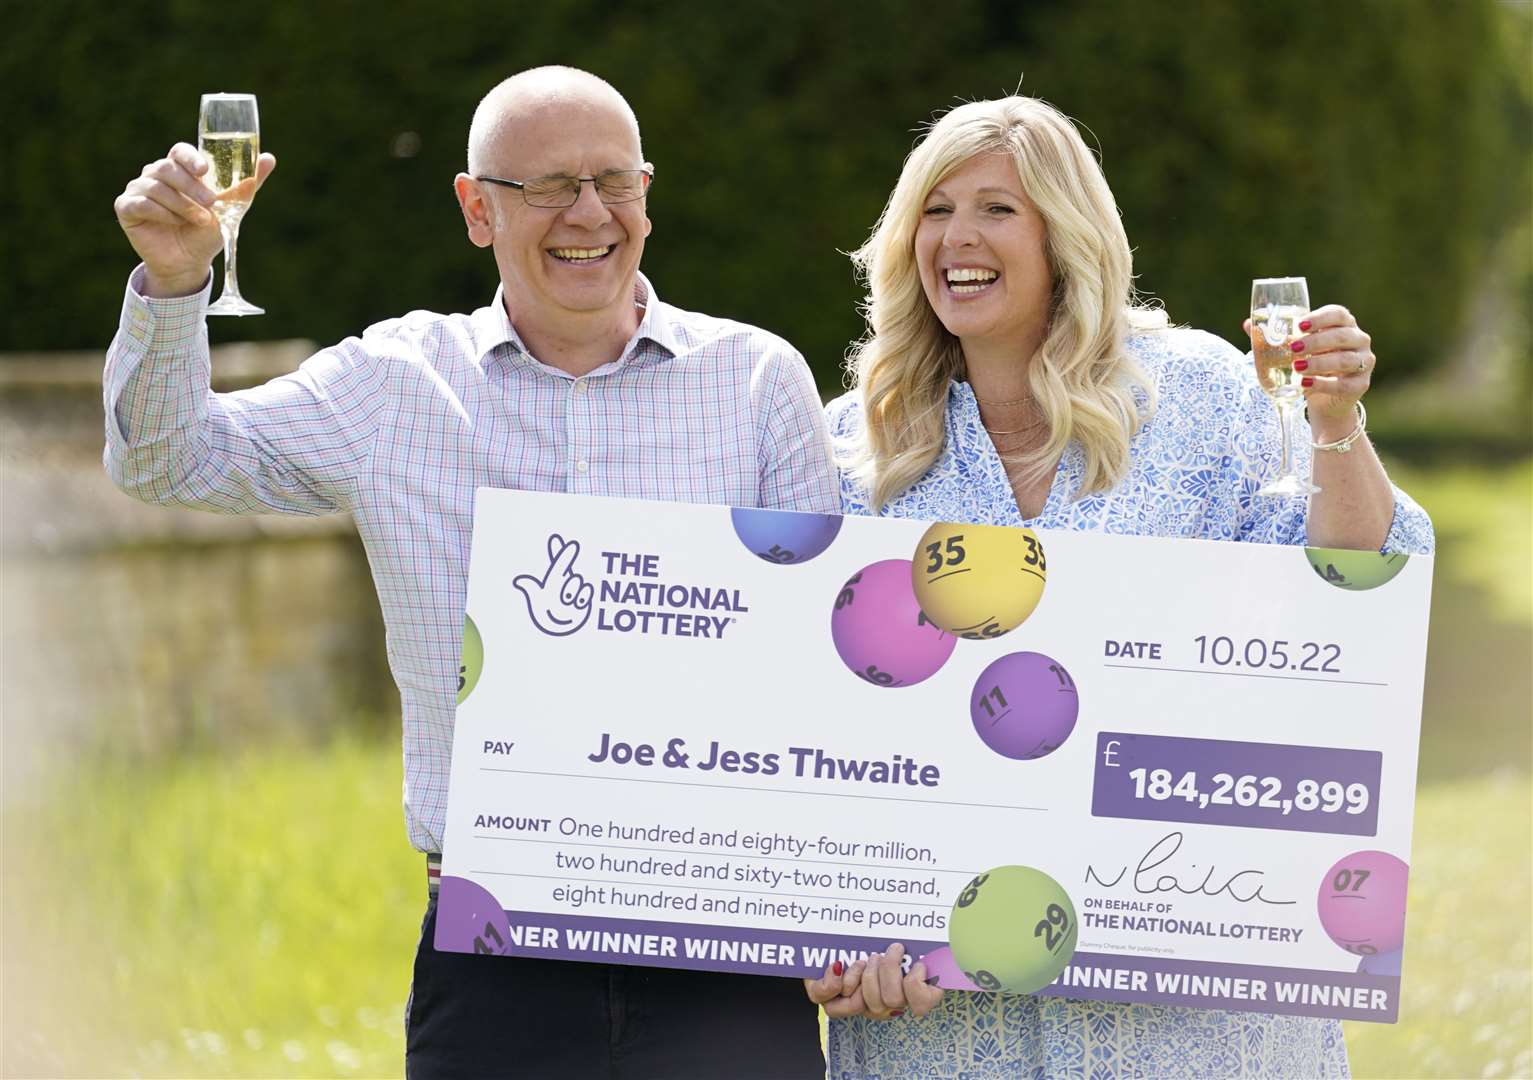 Joe Thwaite, 49, and his wife Jess, 46, from Gloucester, won a record-breaking EuroMillions jackpot of £184m in May (Andrew Matthews/PA)